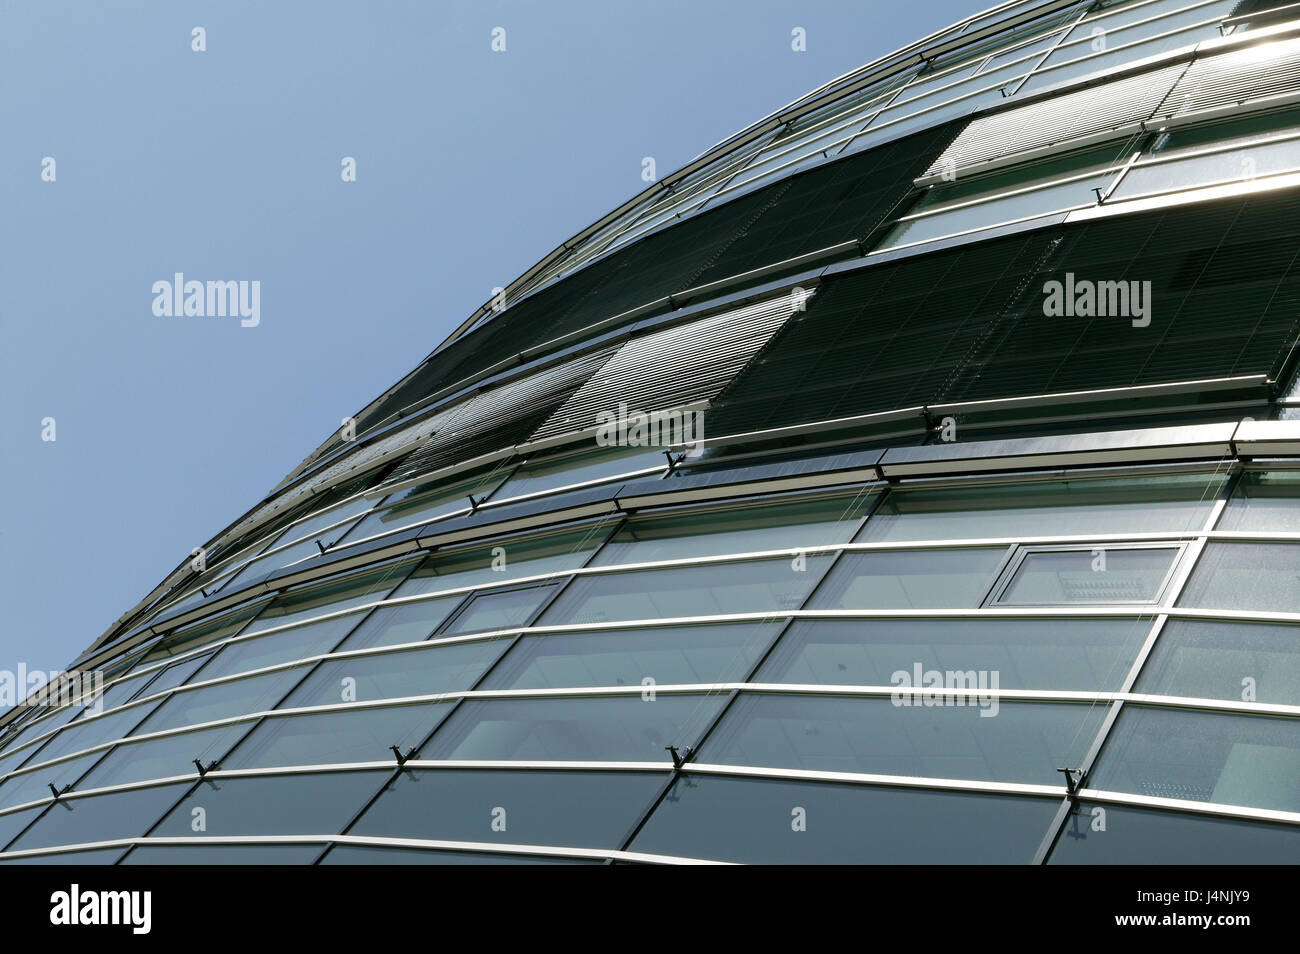 Germany, Bavaria, München-Riem, office building, glass front, from below, South Germany, Upper Bavaria, Munich, Riem, architecture, structure, building, outside, facade, glass, company building, office complex, new building, modern, natural light, sky, blue, Stock Photo